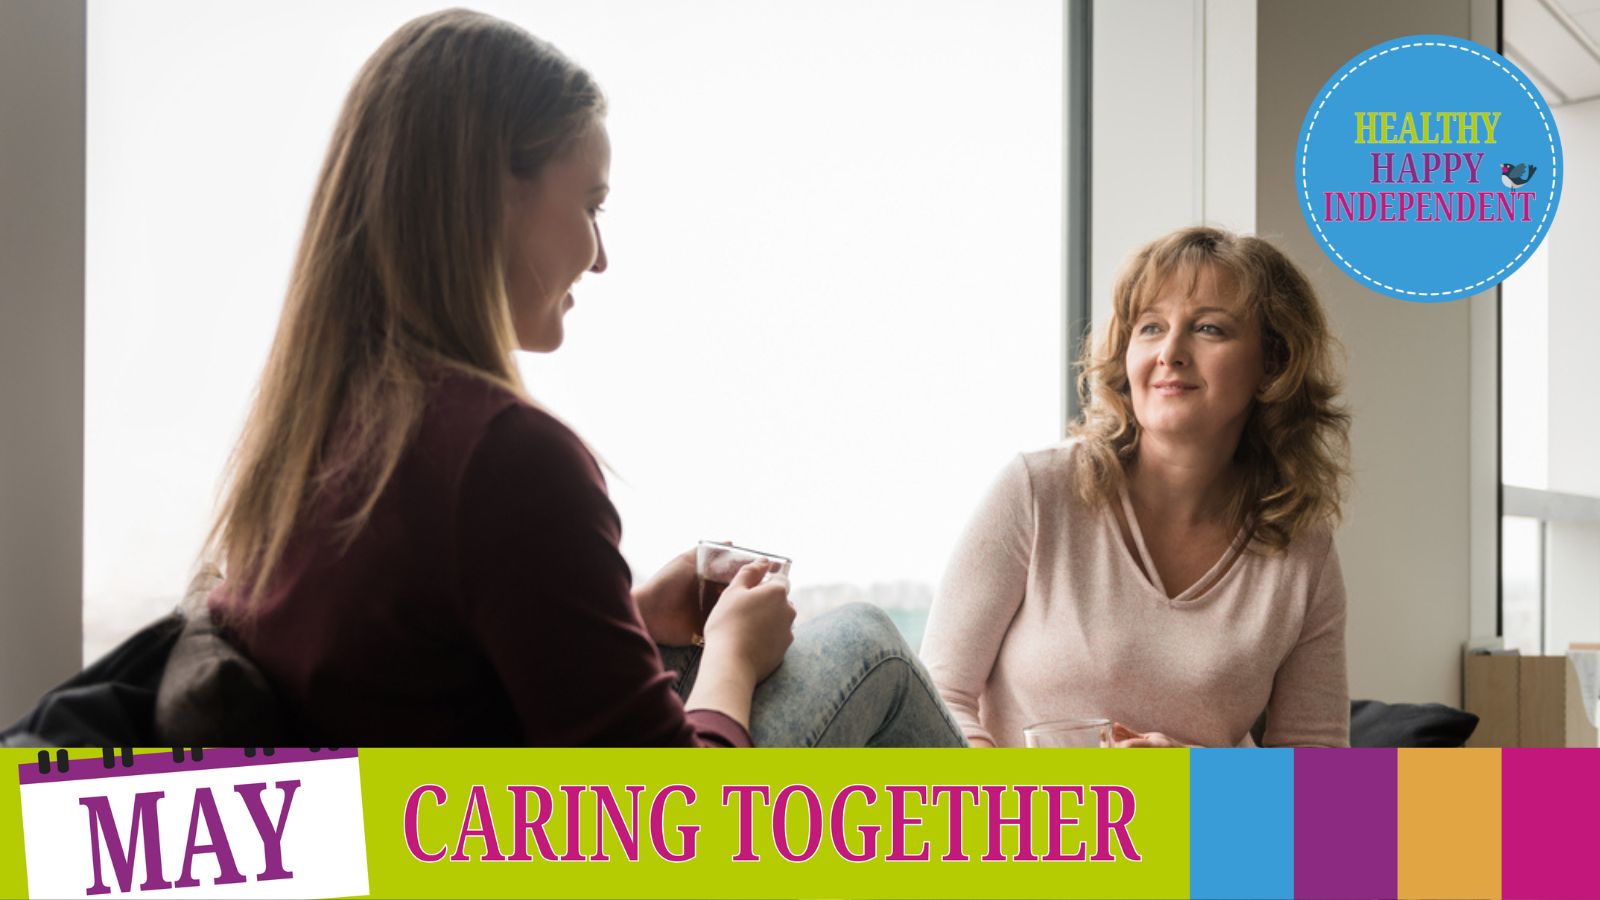 Caring together